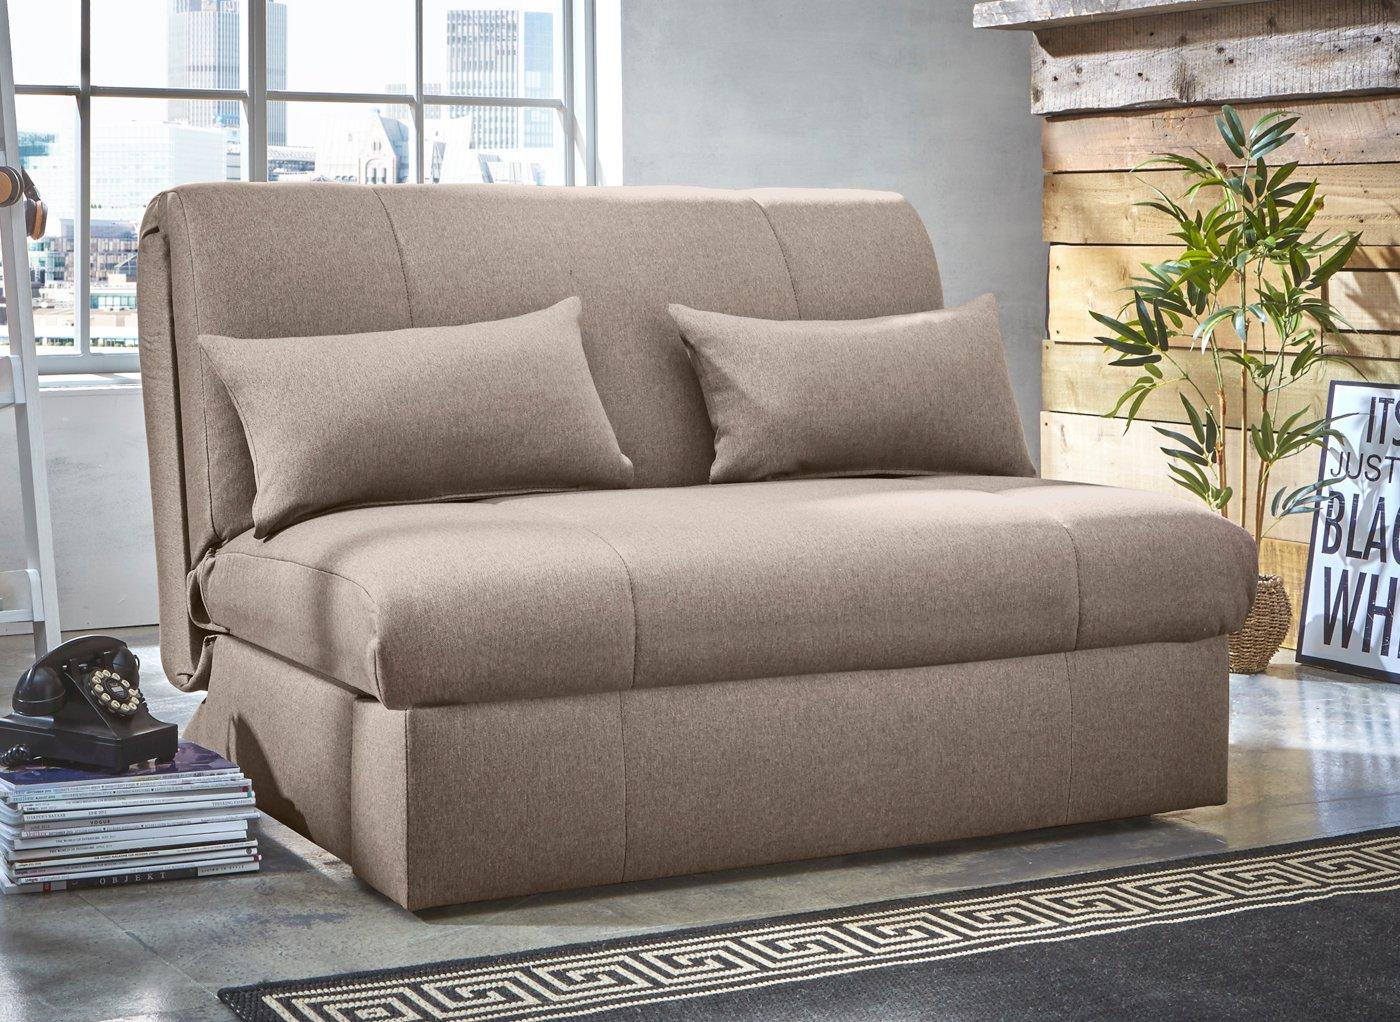 Buy Kelso A Frame Sofa Bed  WantMattress